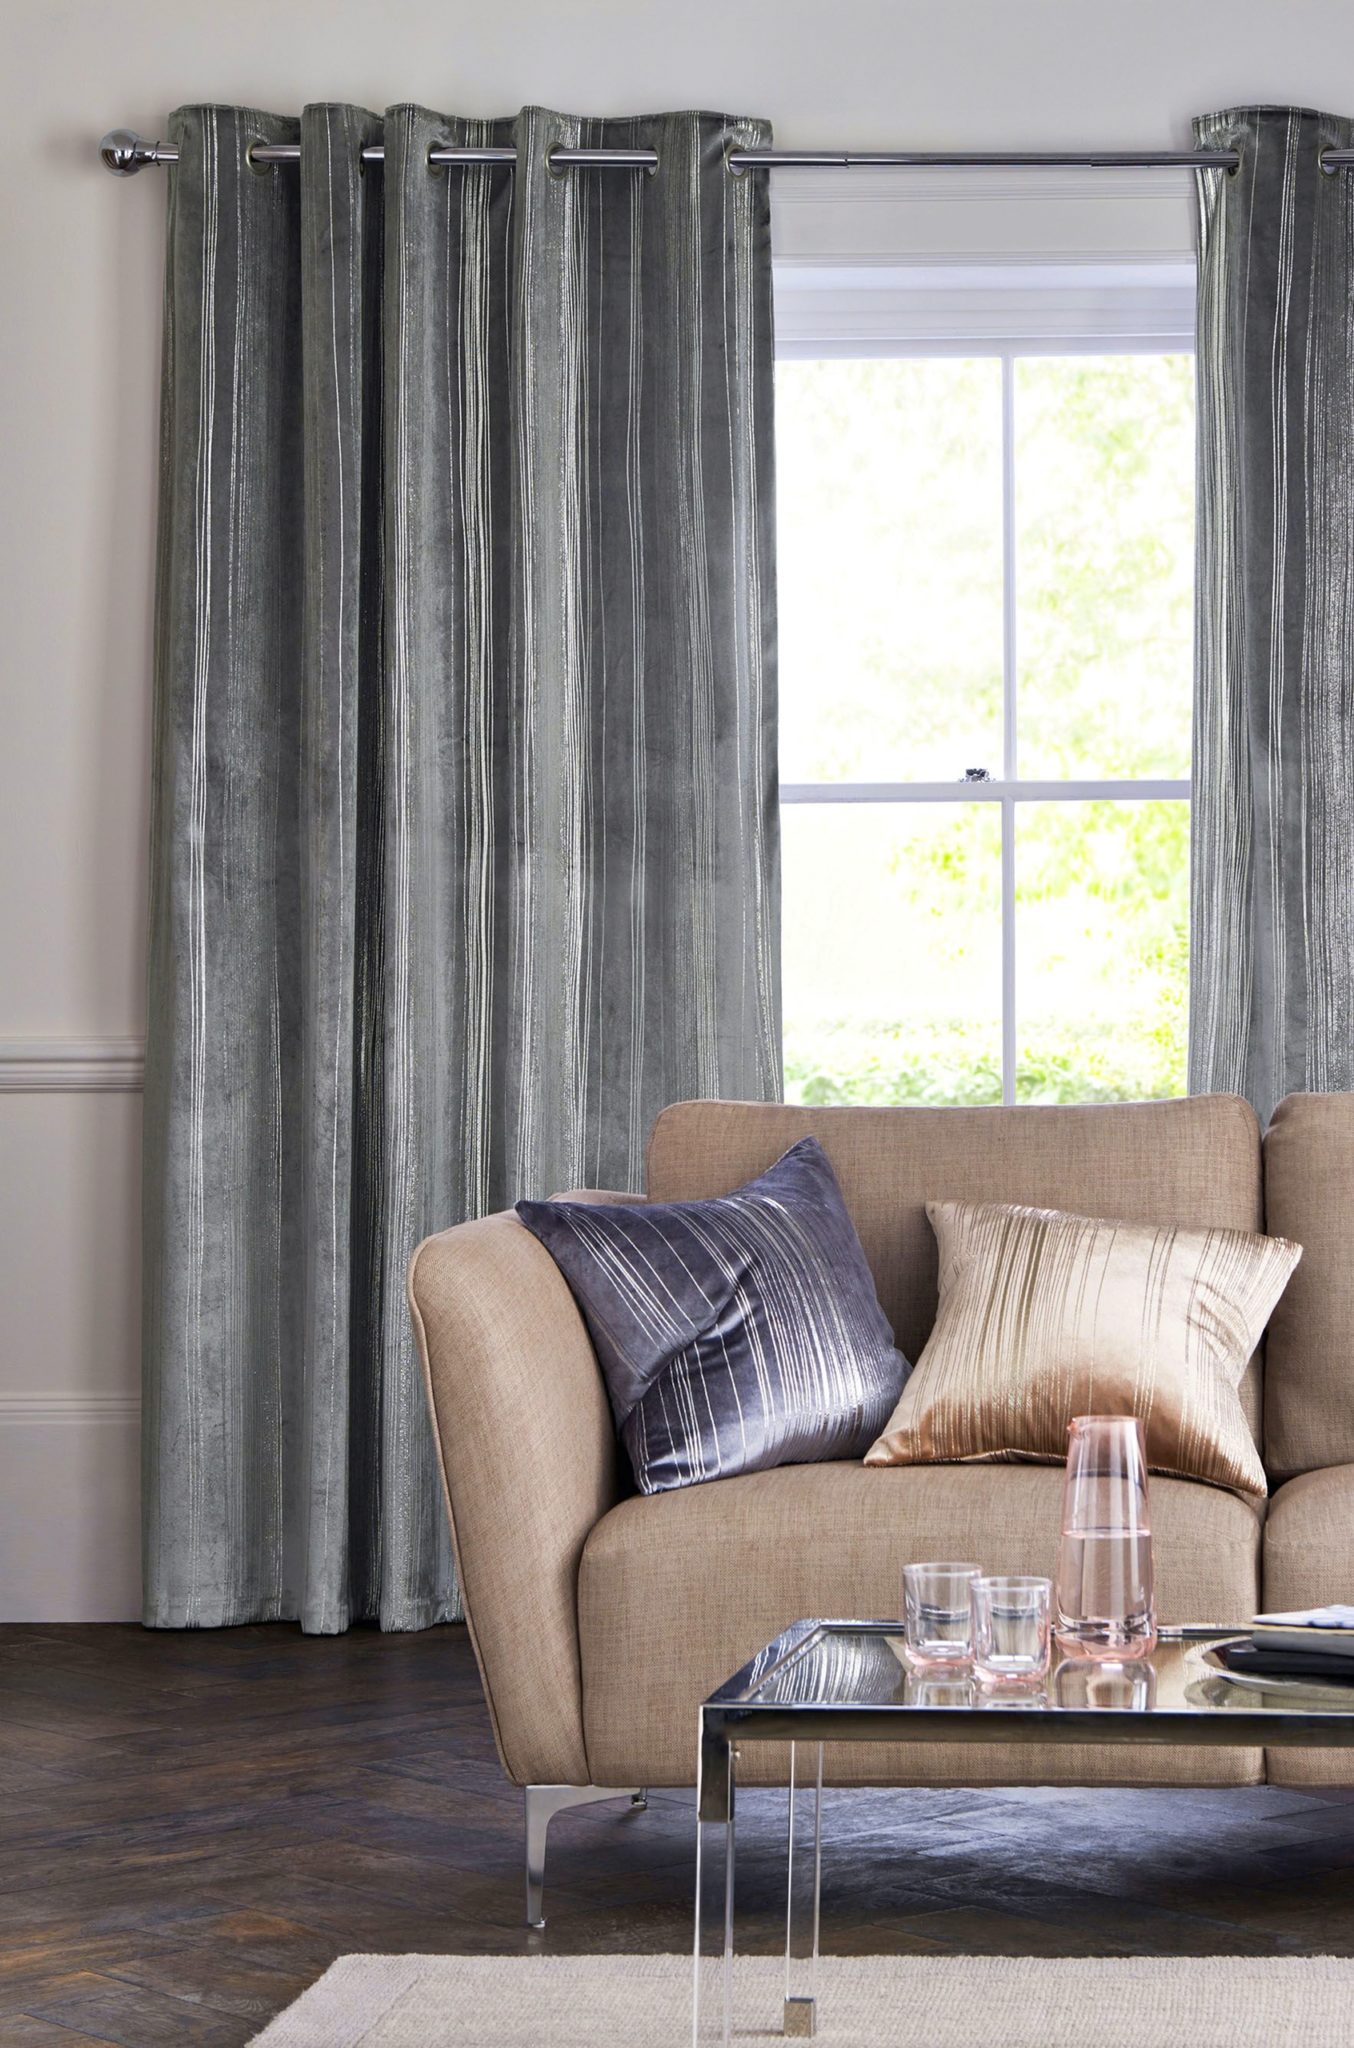 What Color Curtains Go with Beige Couch? (20 Examples with Images